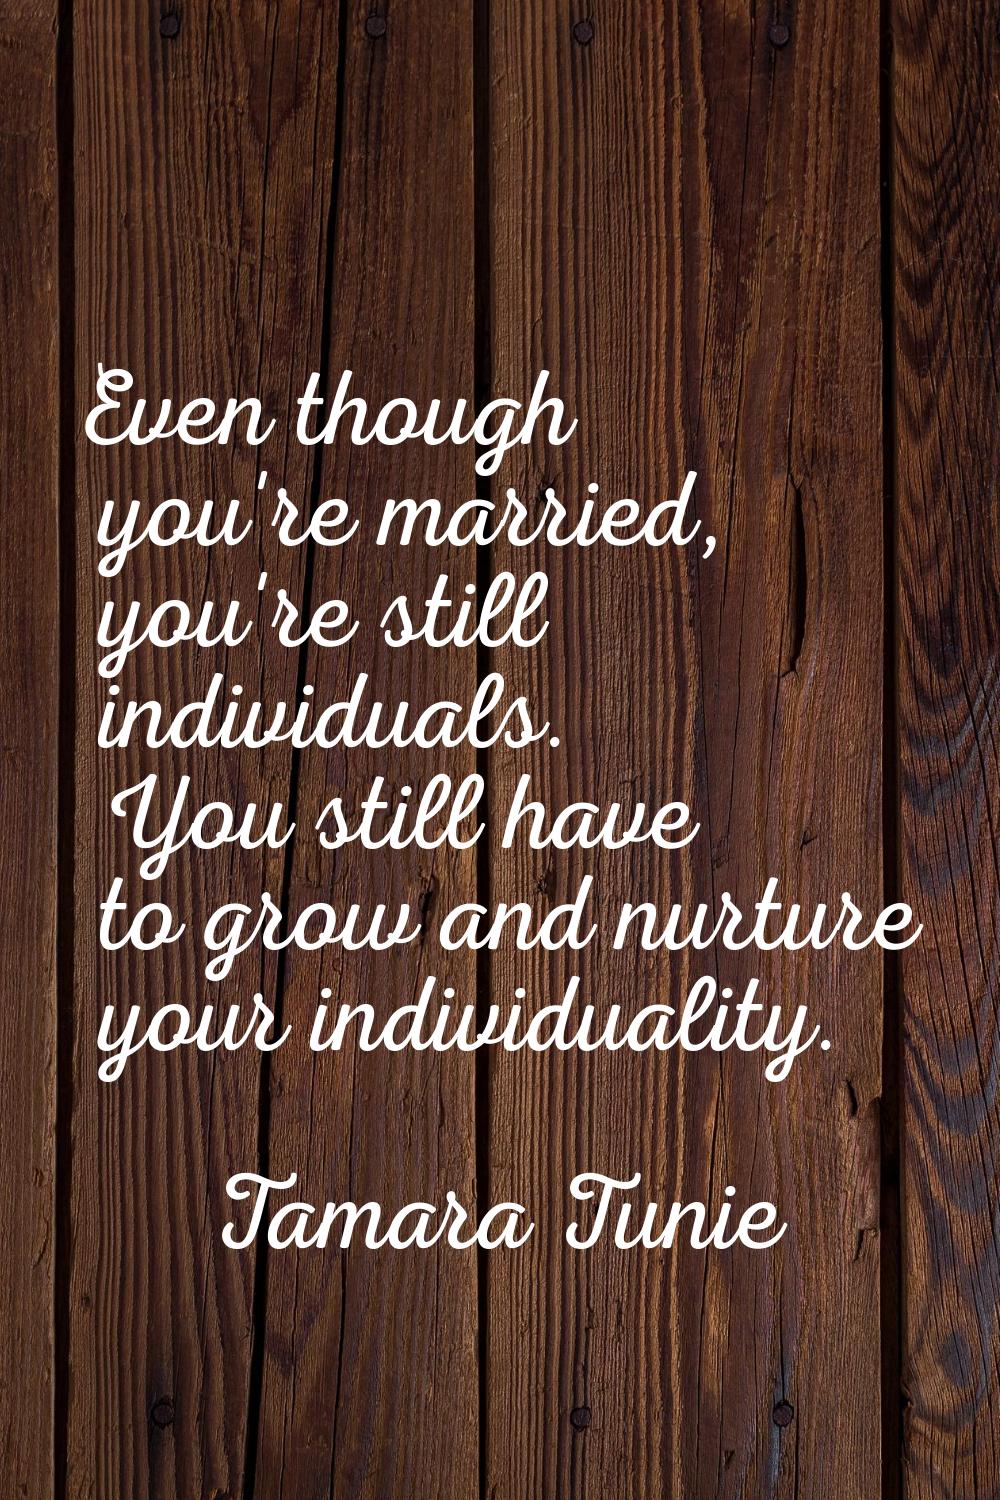 Even though you're married, you're still individuals. You still have to grow and nurture your indiv